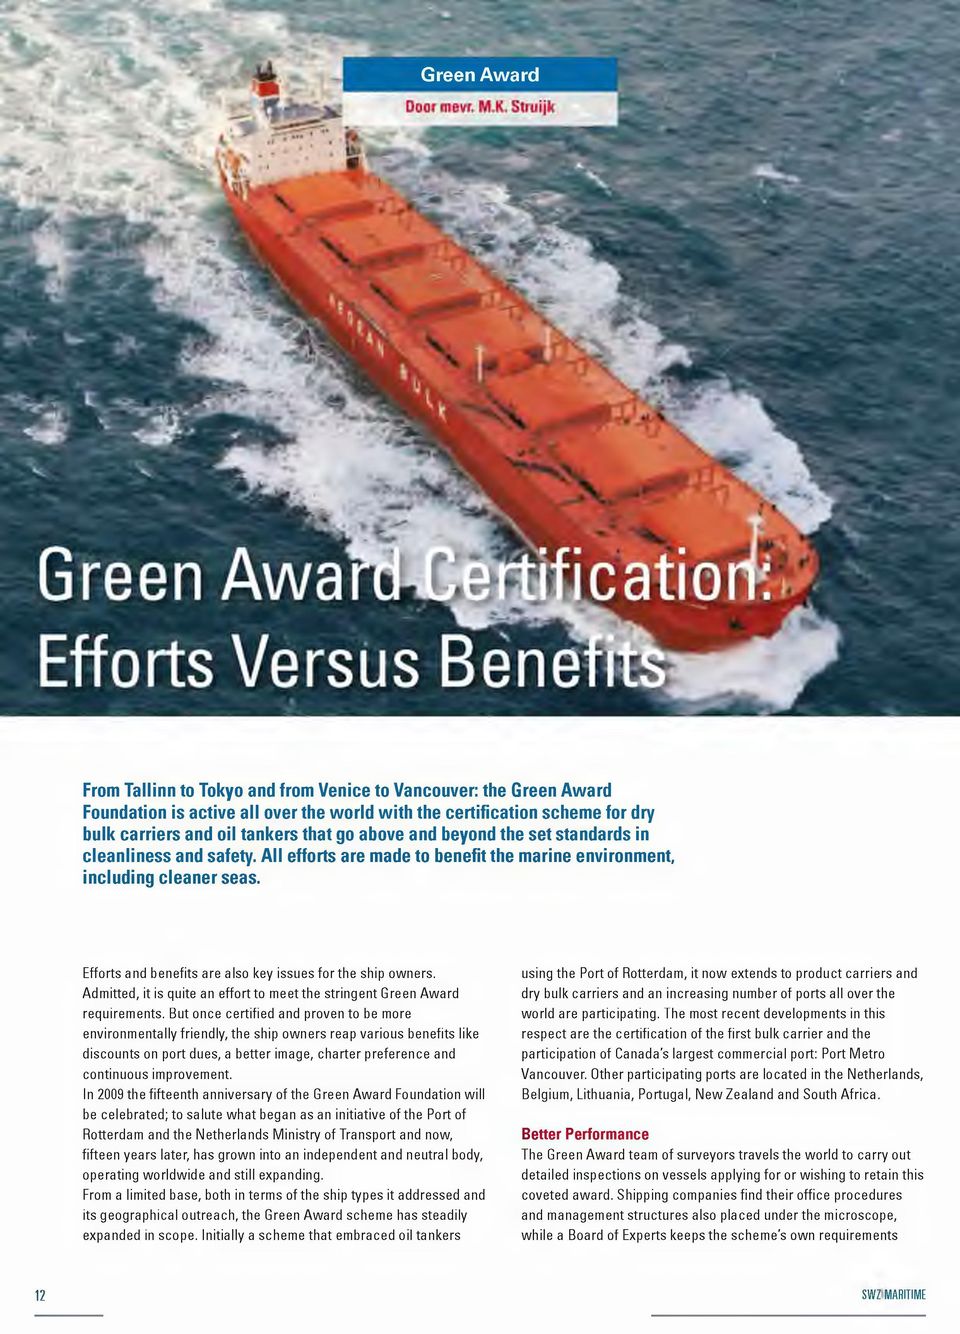 Efforts and benefits are also key issues forthe ship owners. Admitted, it is quite an effortto meet the stringent Green Award requirements.